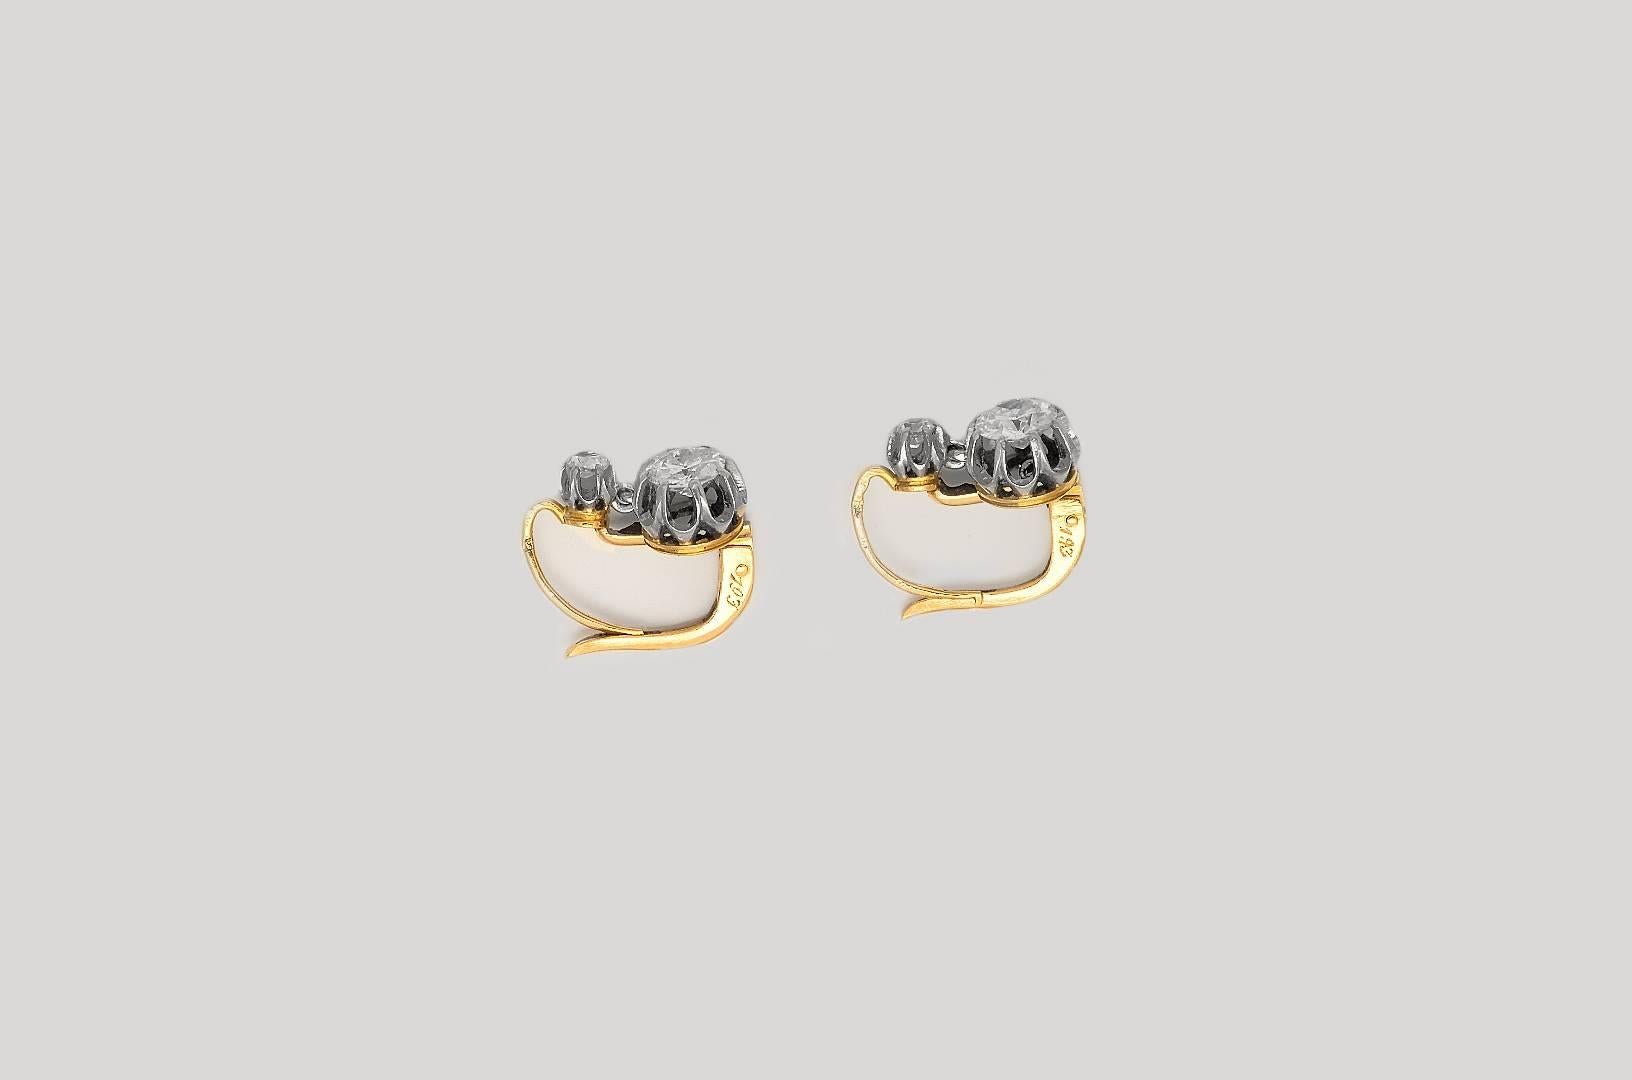 Made of gold 18 Kts. backed and platinum topped tow-stone earrings. Each earring centers one bigger old European-cut diamond weighing 0´60 carats aprox., suspended from one smaller old European-cut diamond weighing 0´10 carats aprox. French assay